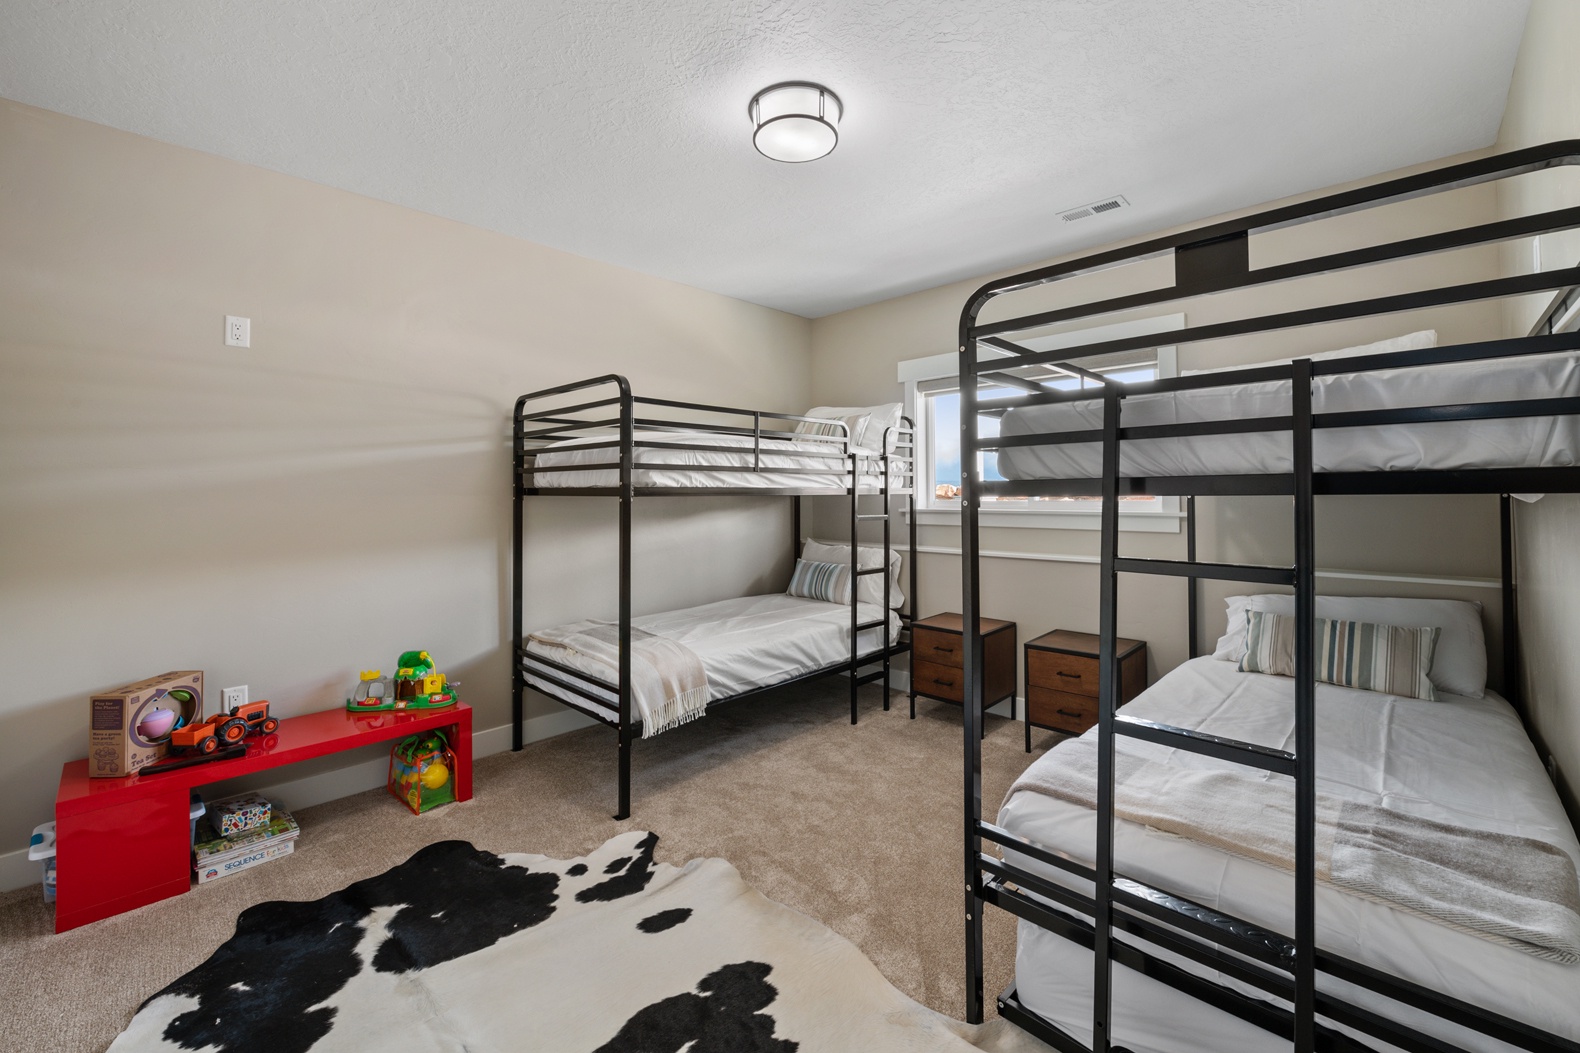 Persimmon Hill-Bunk room extra long twin beds